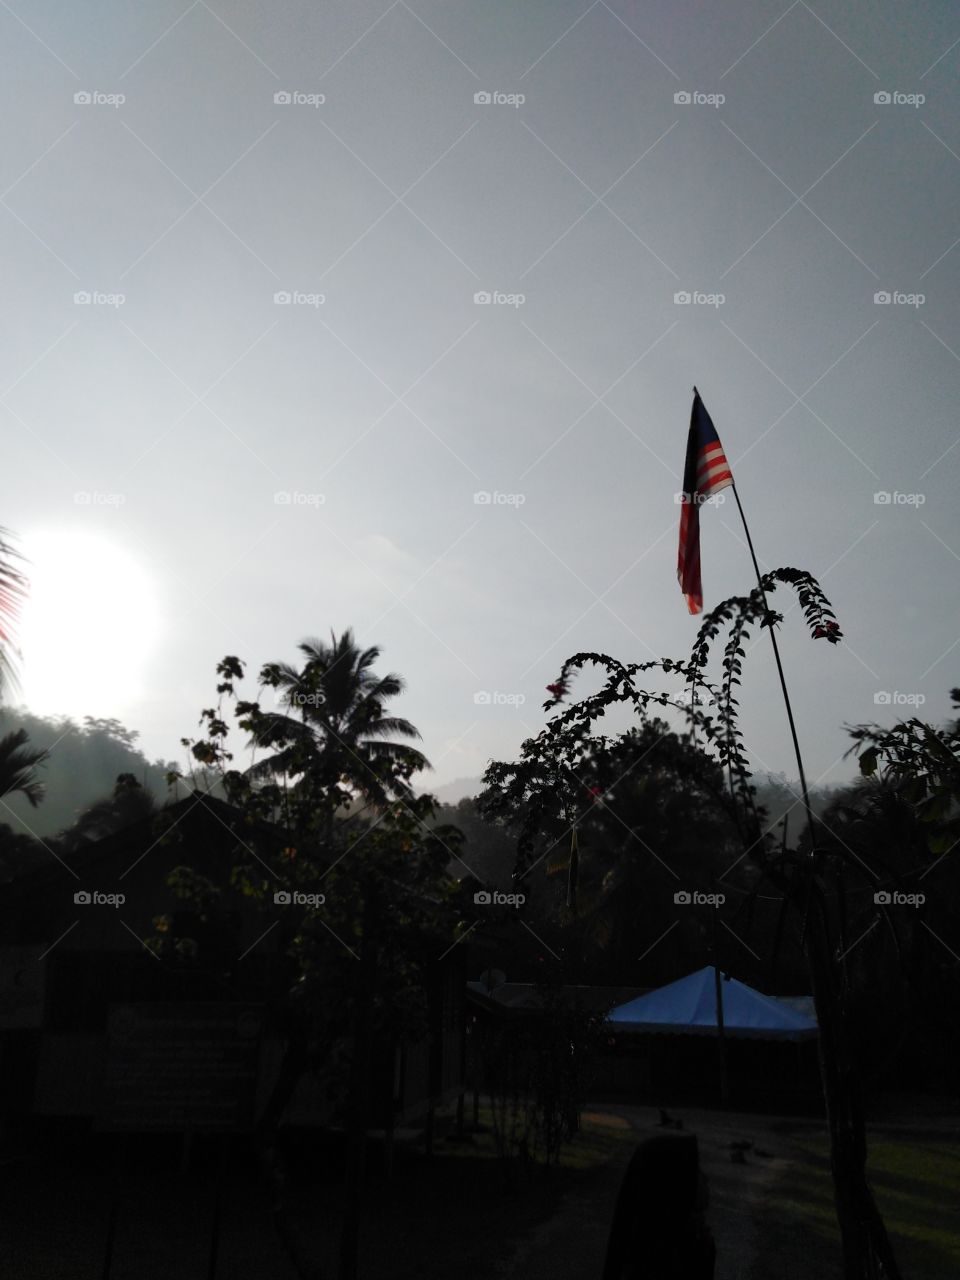 Landscape of trees on a sunrise in the morning with our national flag